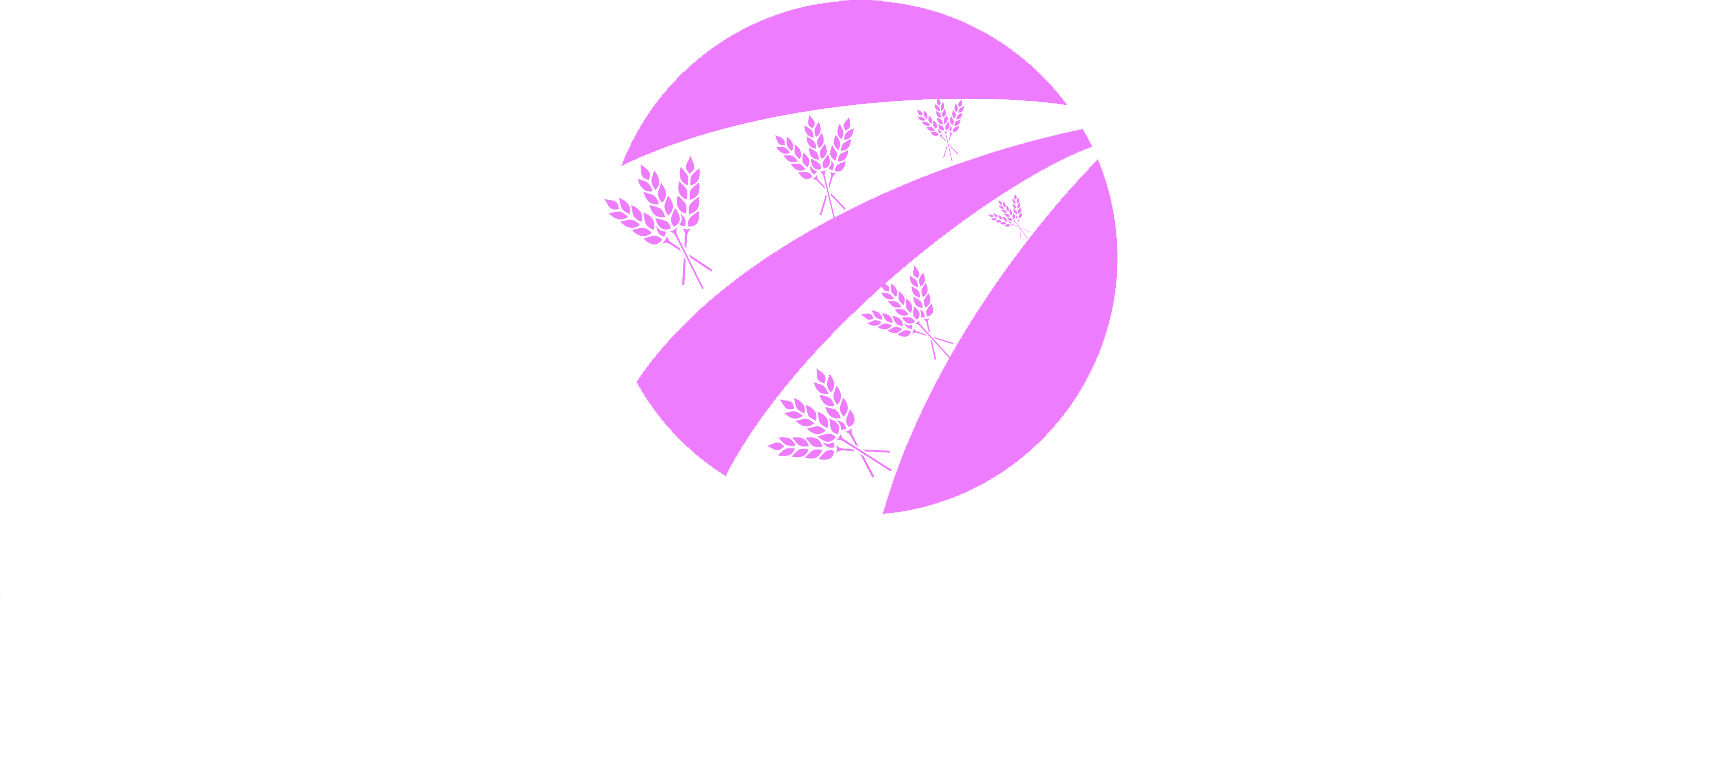 Broad Acre Farm Safety